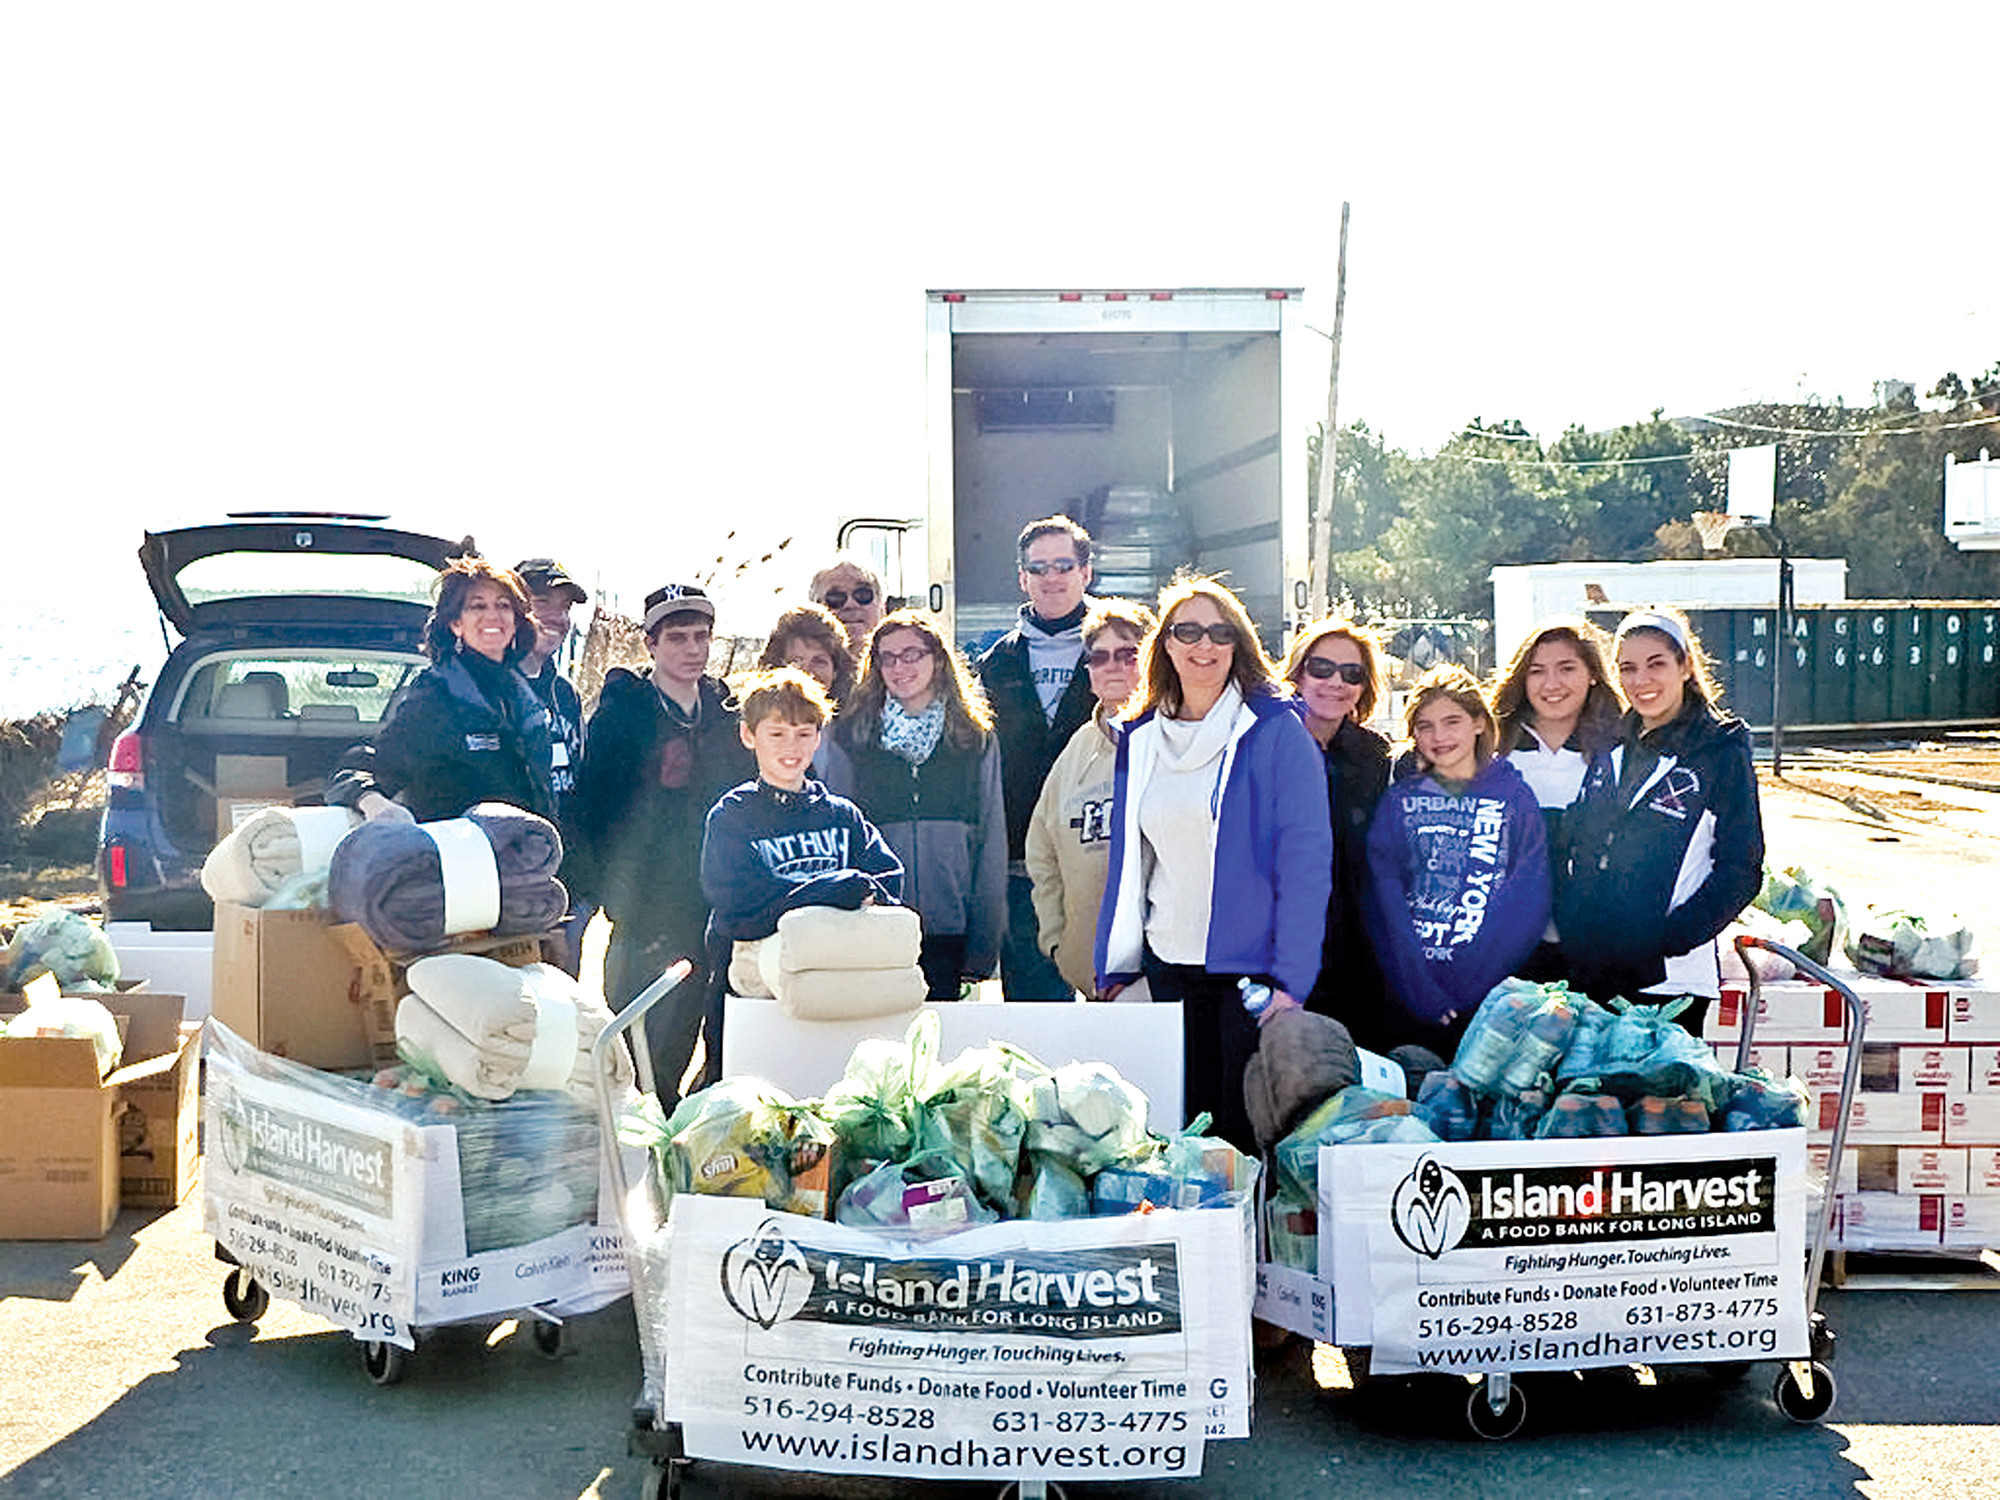 Island Harvest President and CEO Randi Shubin Dresner, far left, staff and volunteers aided storm victims in Long Island's hardest hit locations.